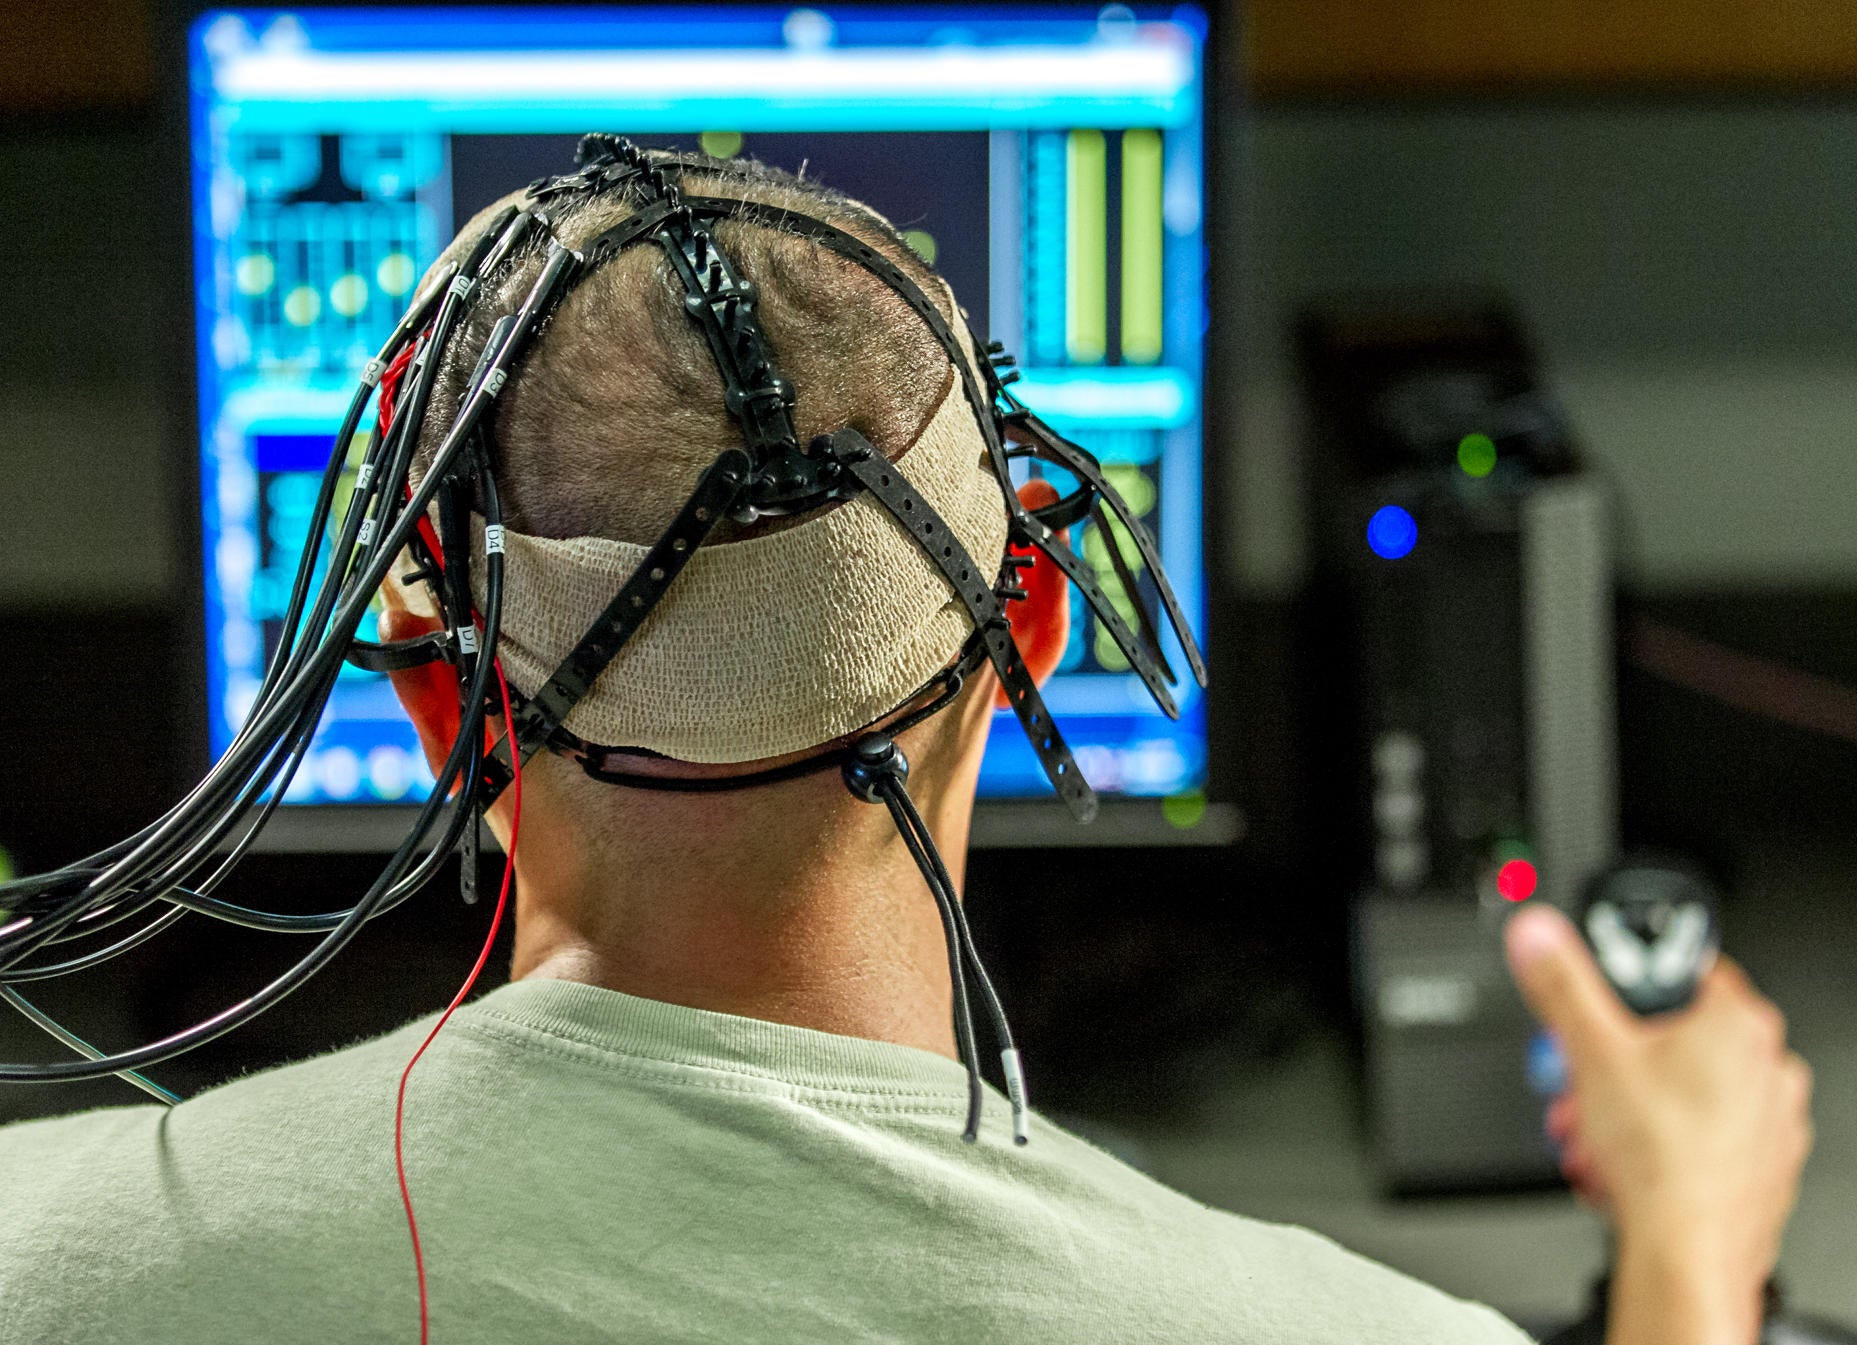 Does Brain Stimulation Boost Memory and Focus? Huge Study Tries to Settle Debate